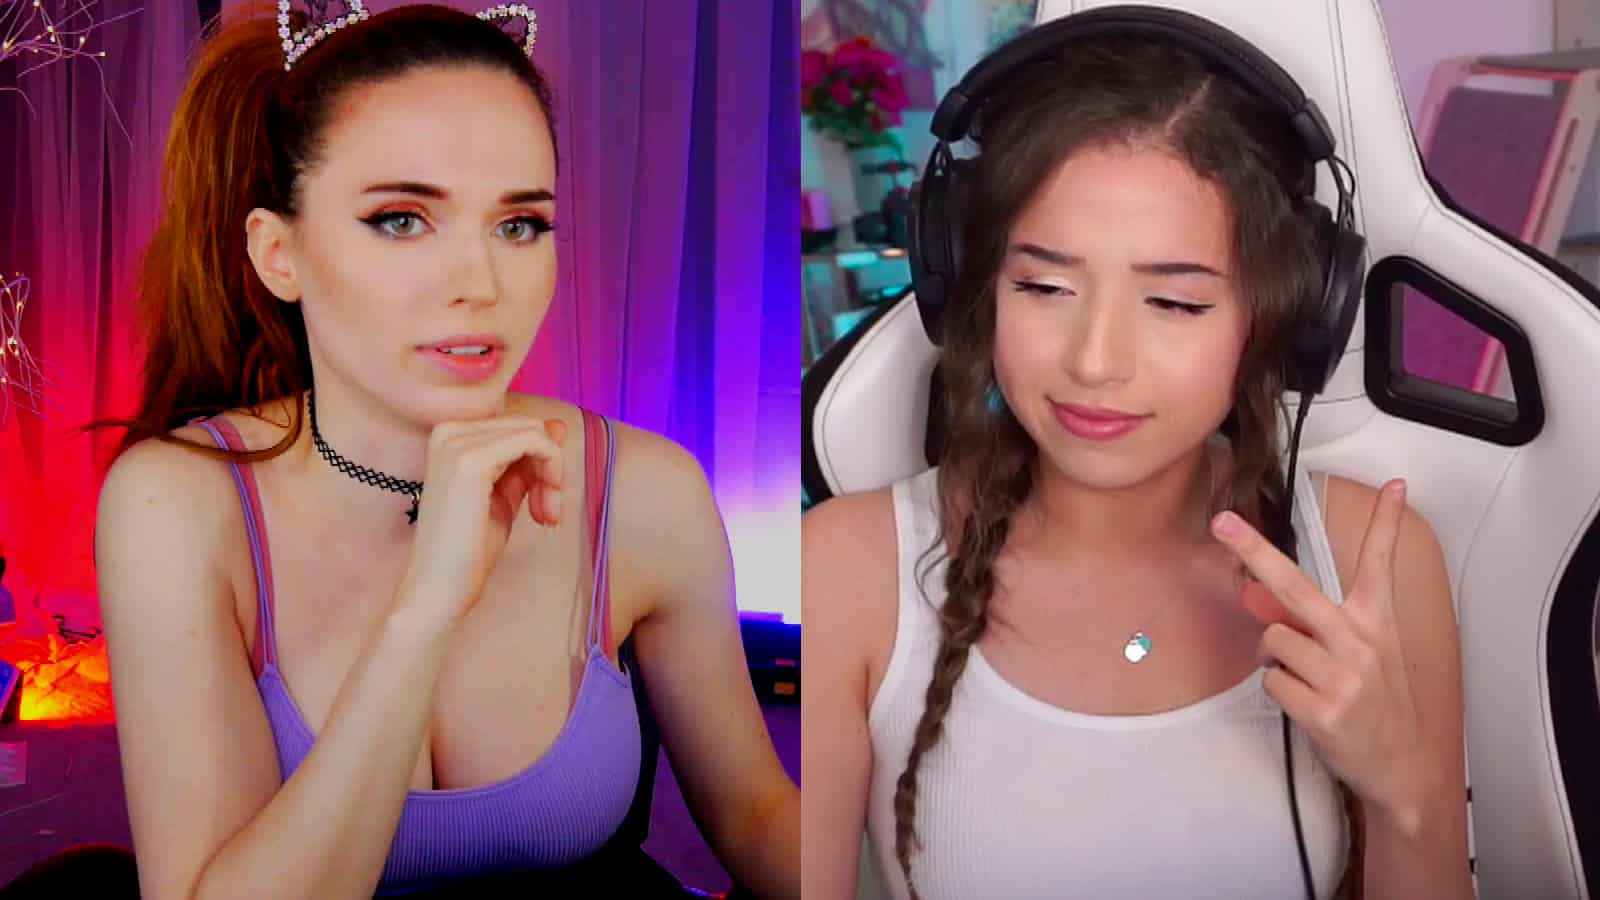 Amouranth and Pokimane on Twitch